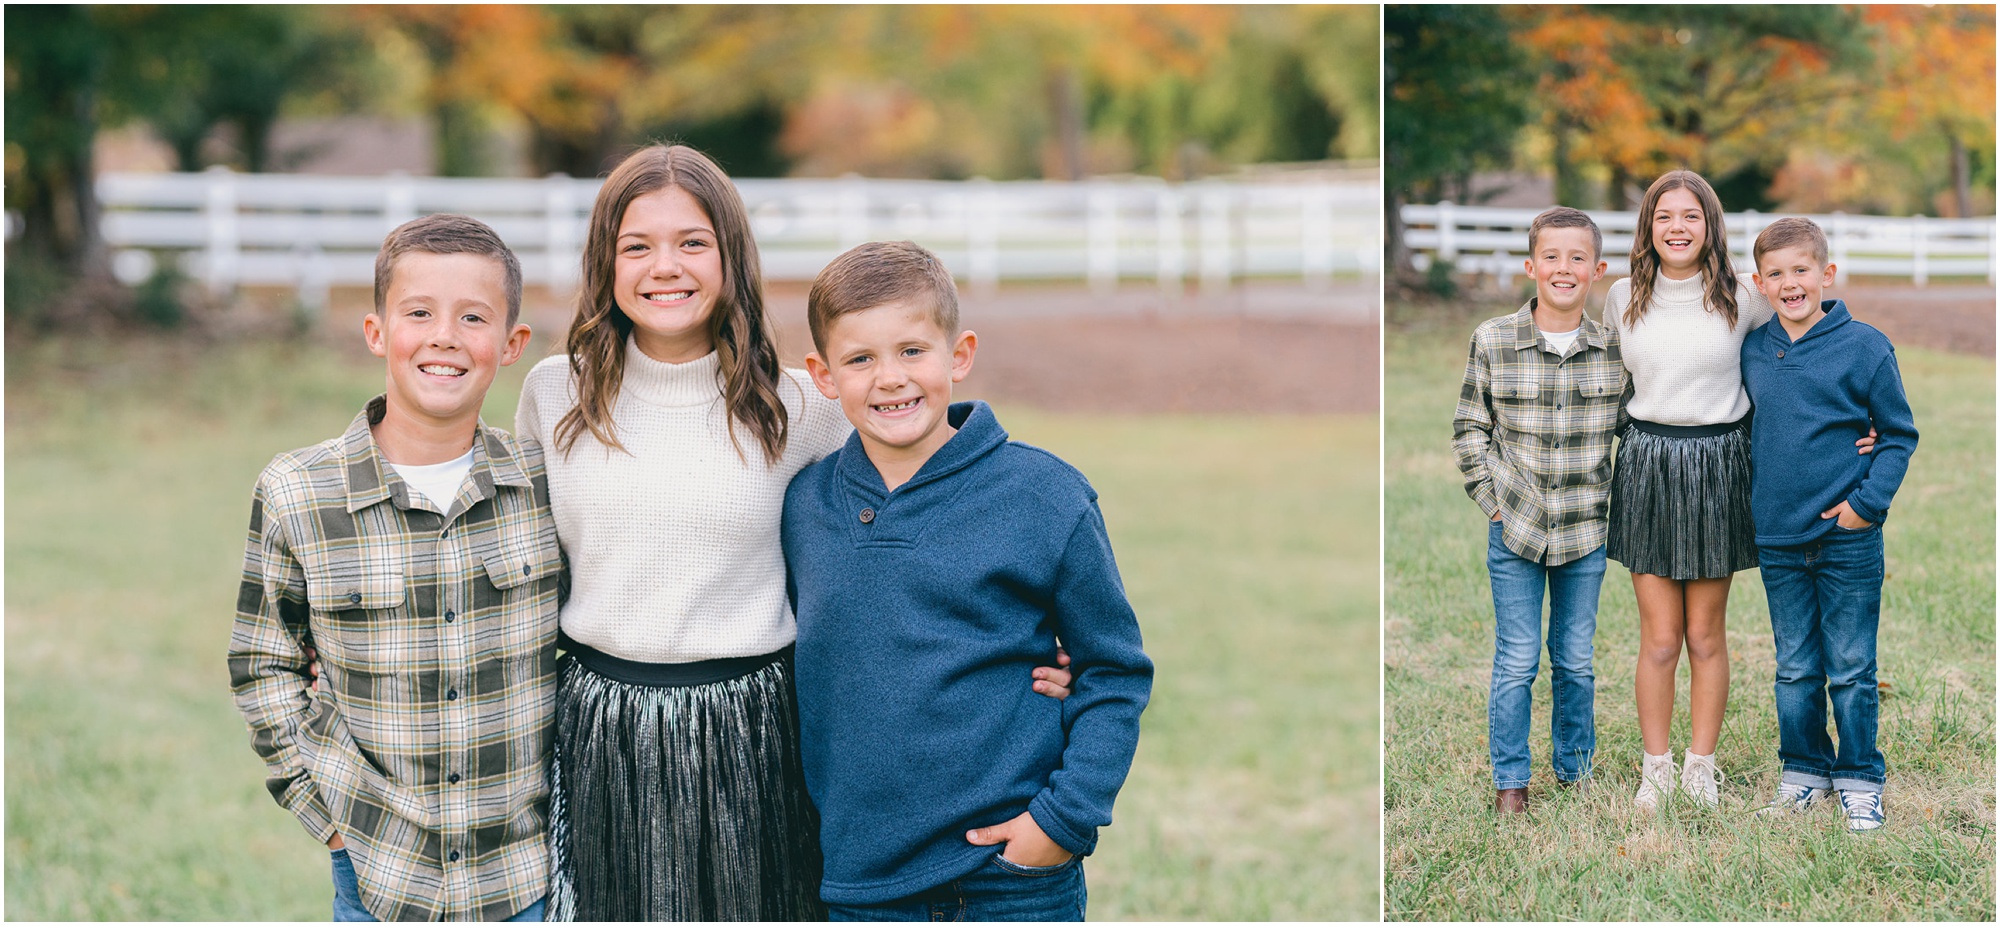 A tween girl poses with her two younger brothers for Fall family photos.